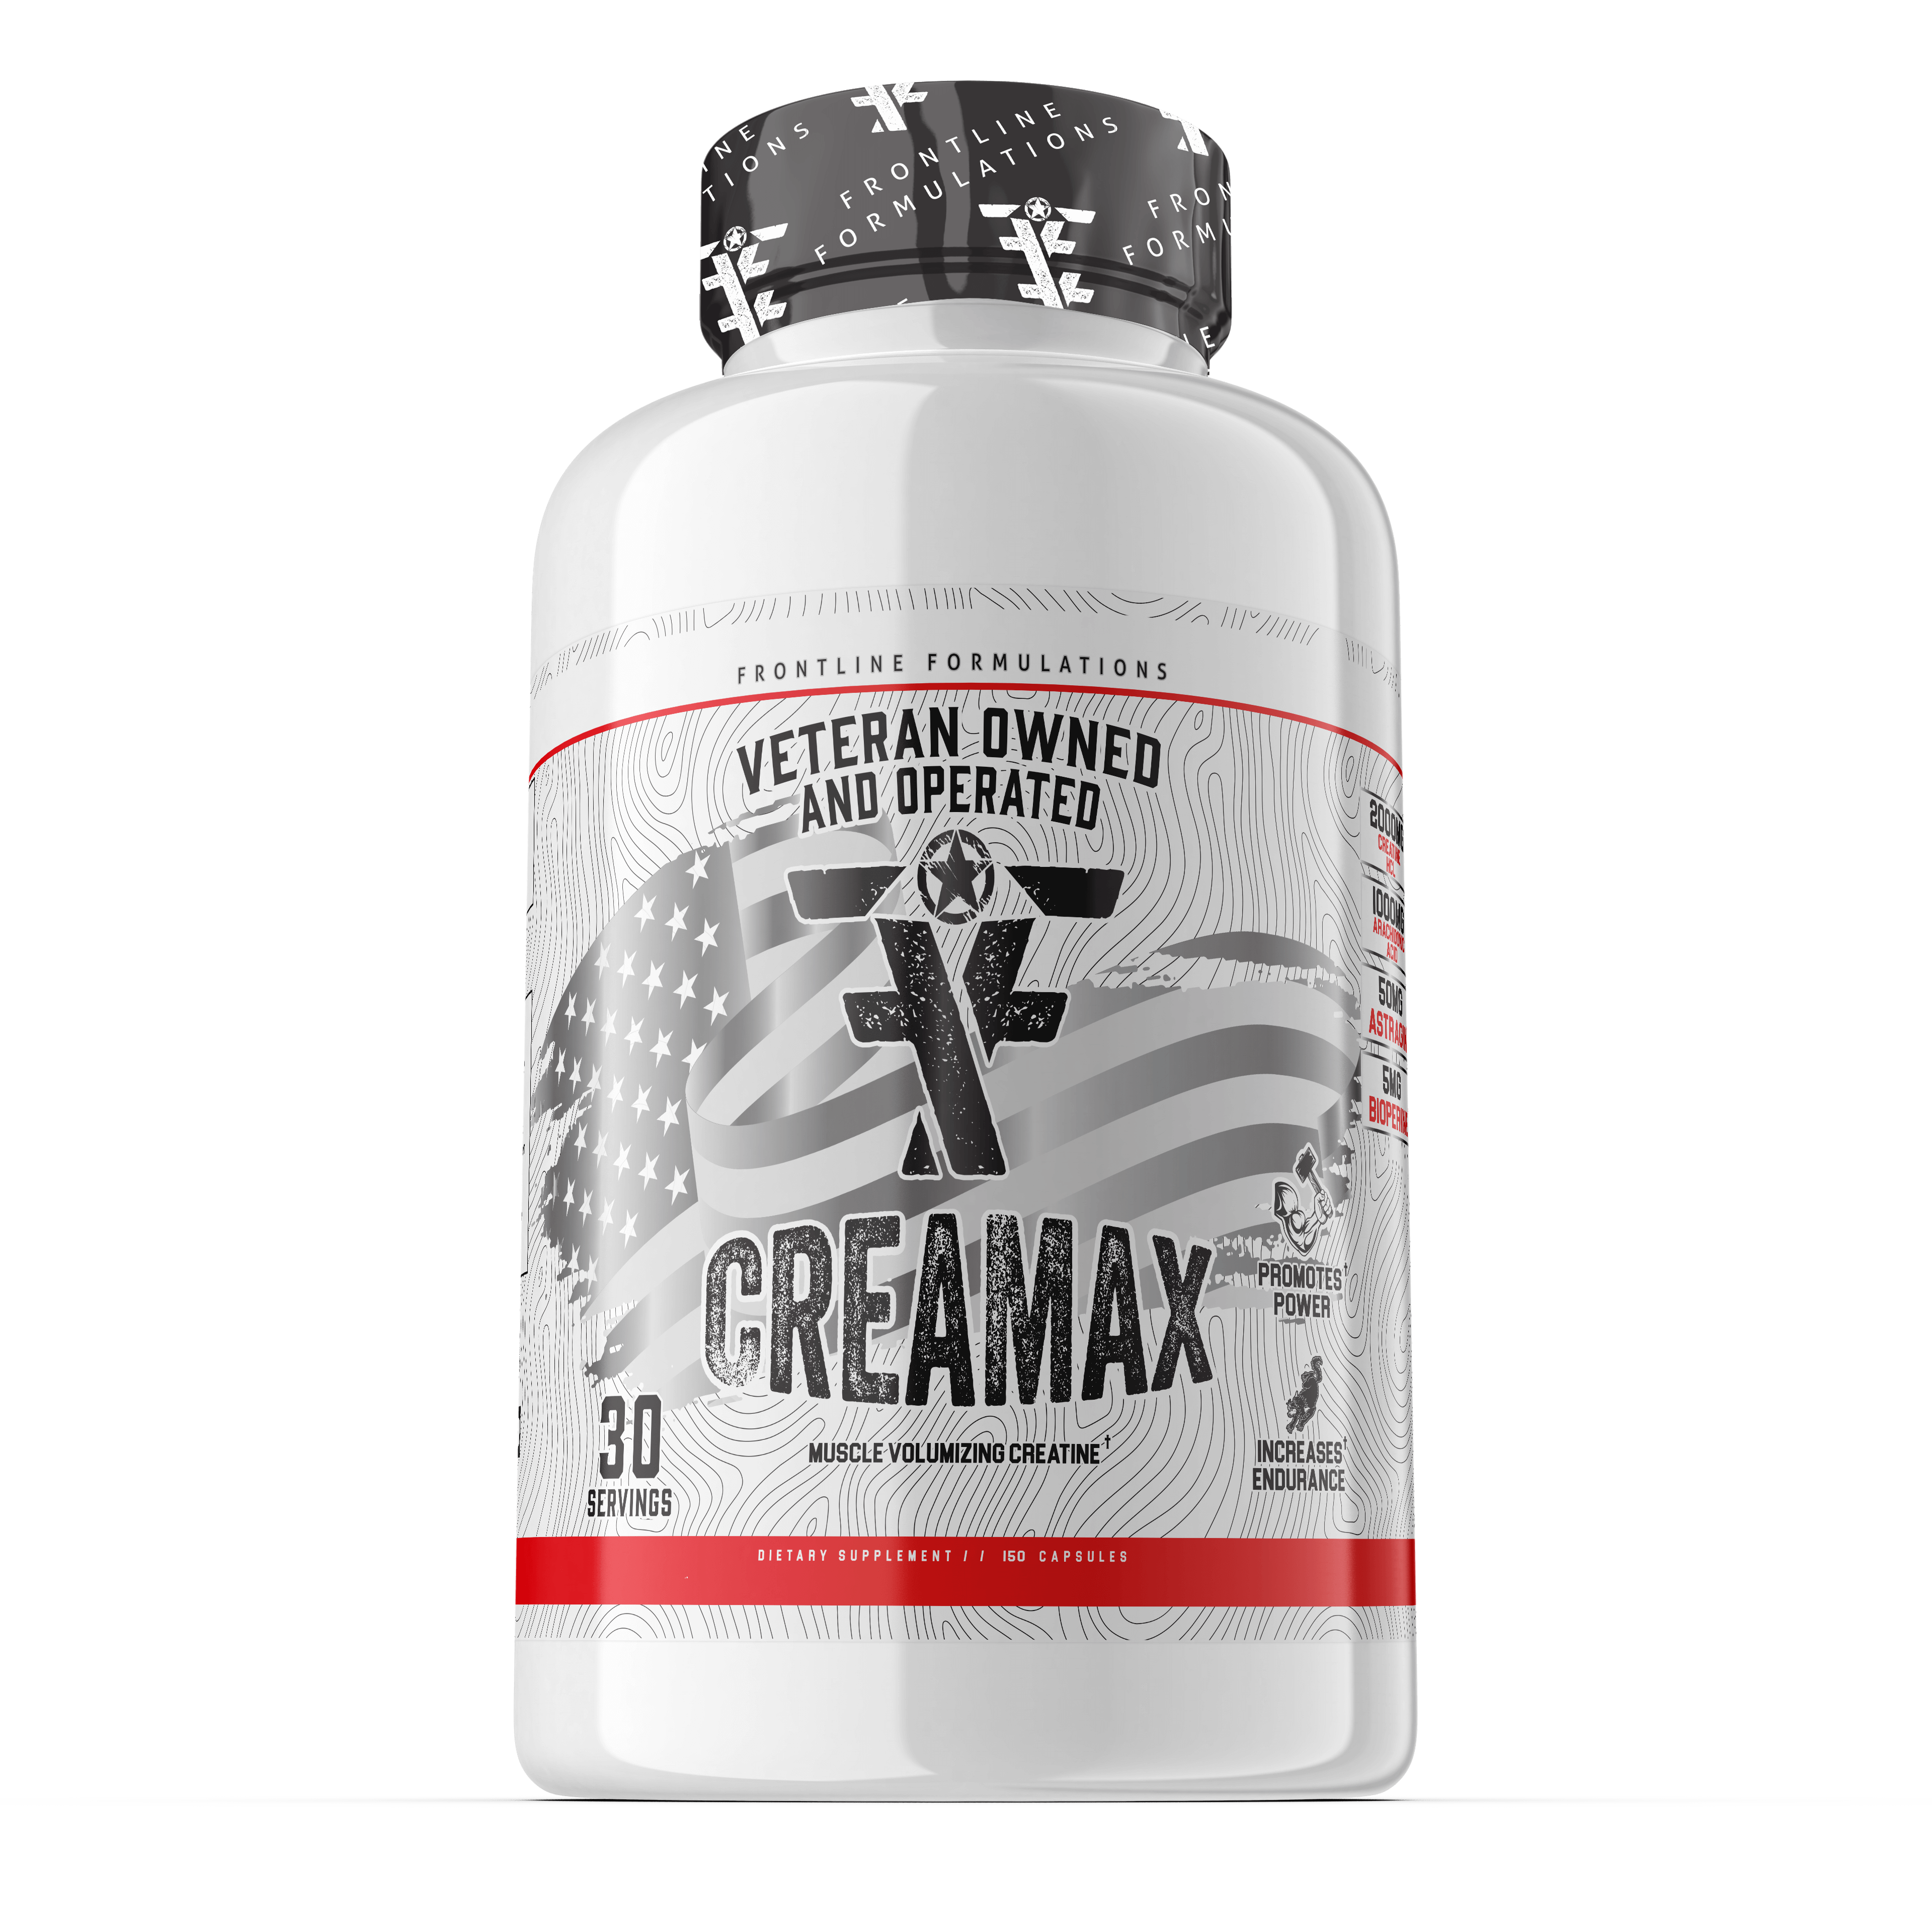 Creamax Introducing Creamax: Upgrade your workout experience with Creamax—a convenient solution for enhanced performance without the hassle of traditional powdered creatine. Creamax features Creatine HCl, a soluble form of creatine known for its benefits